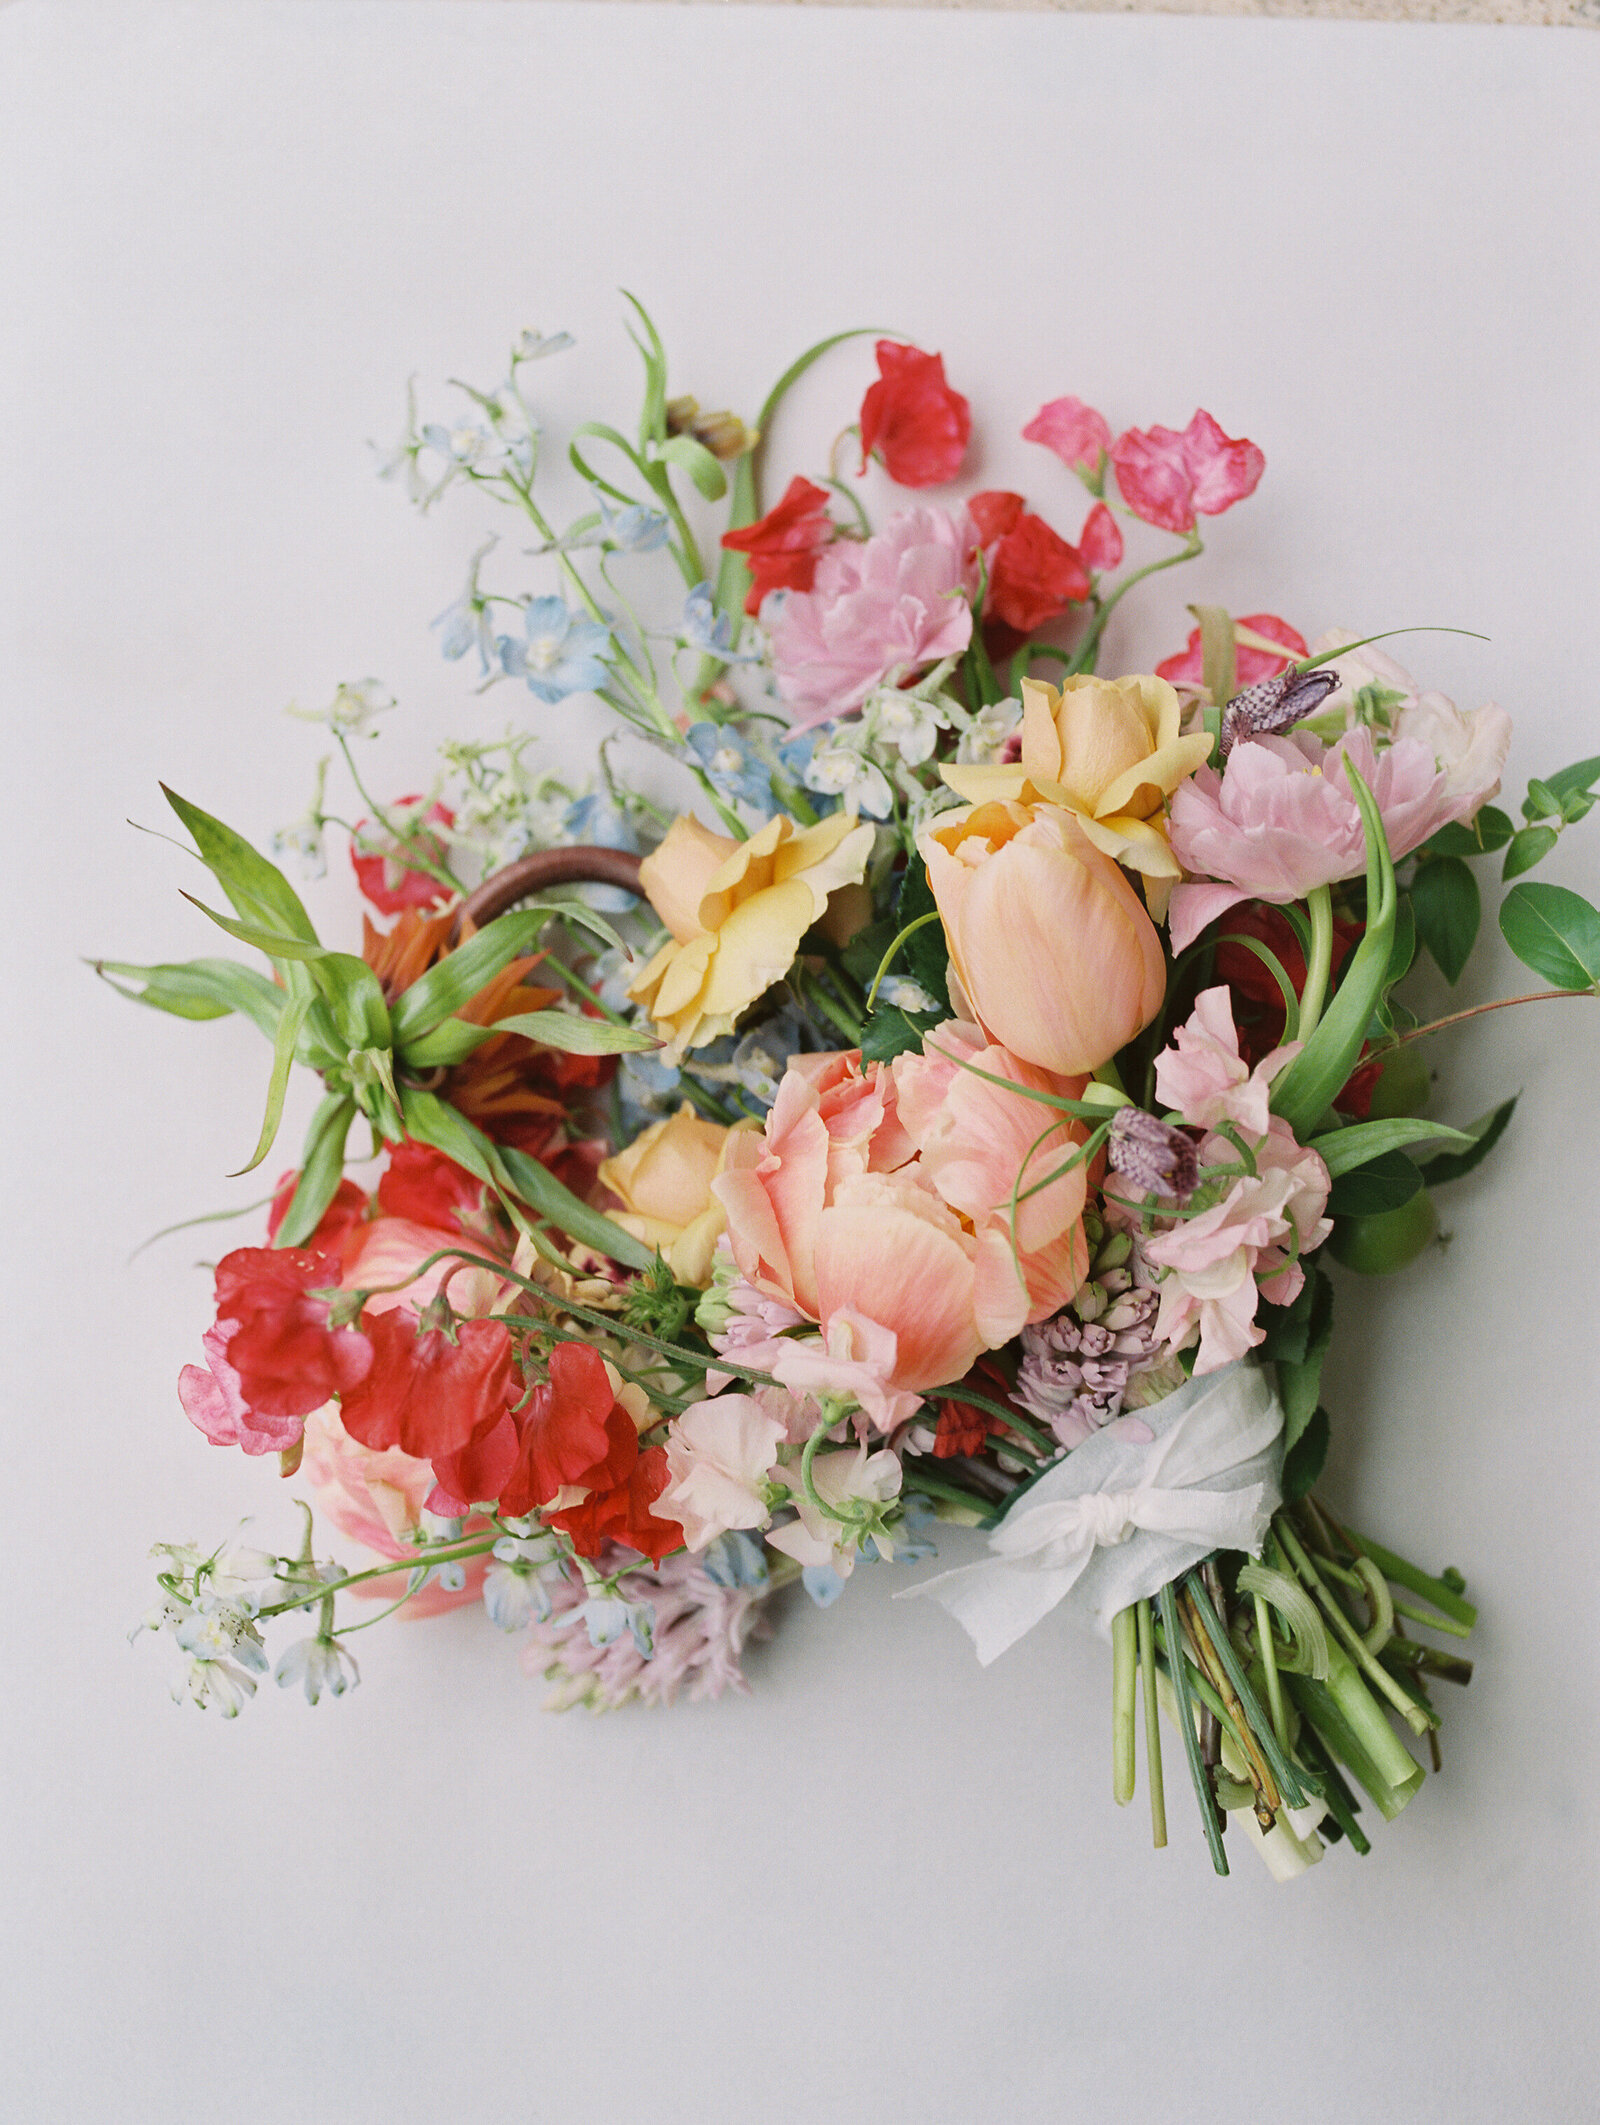 Very colorful and whimsical bouquet arrangement on a soft surface at Merrick Hollow